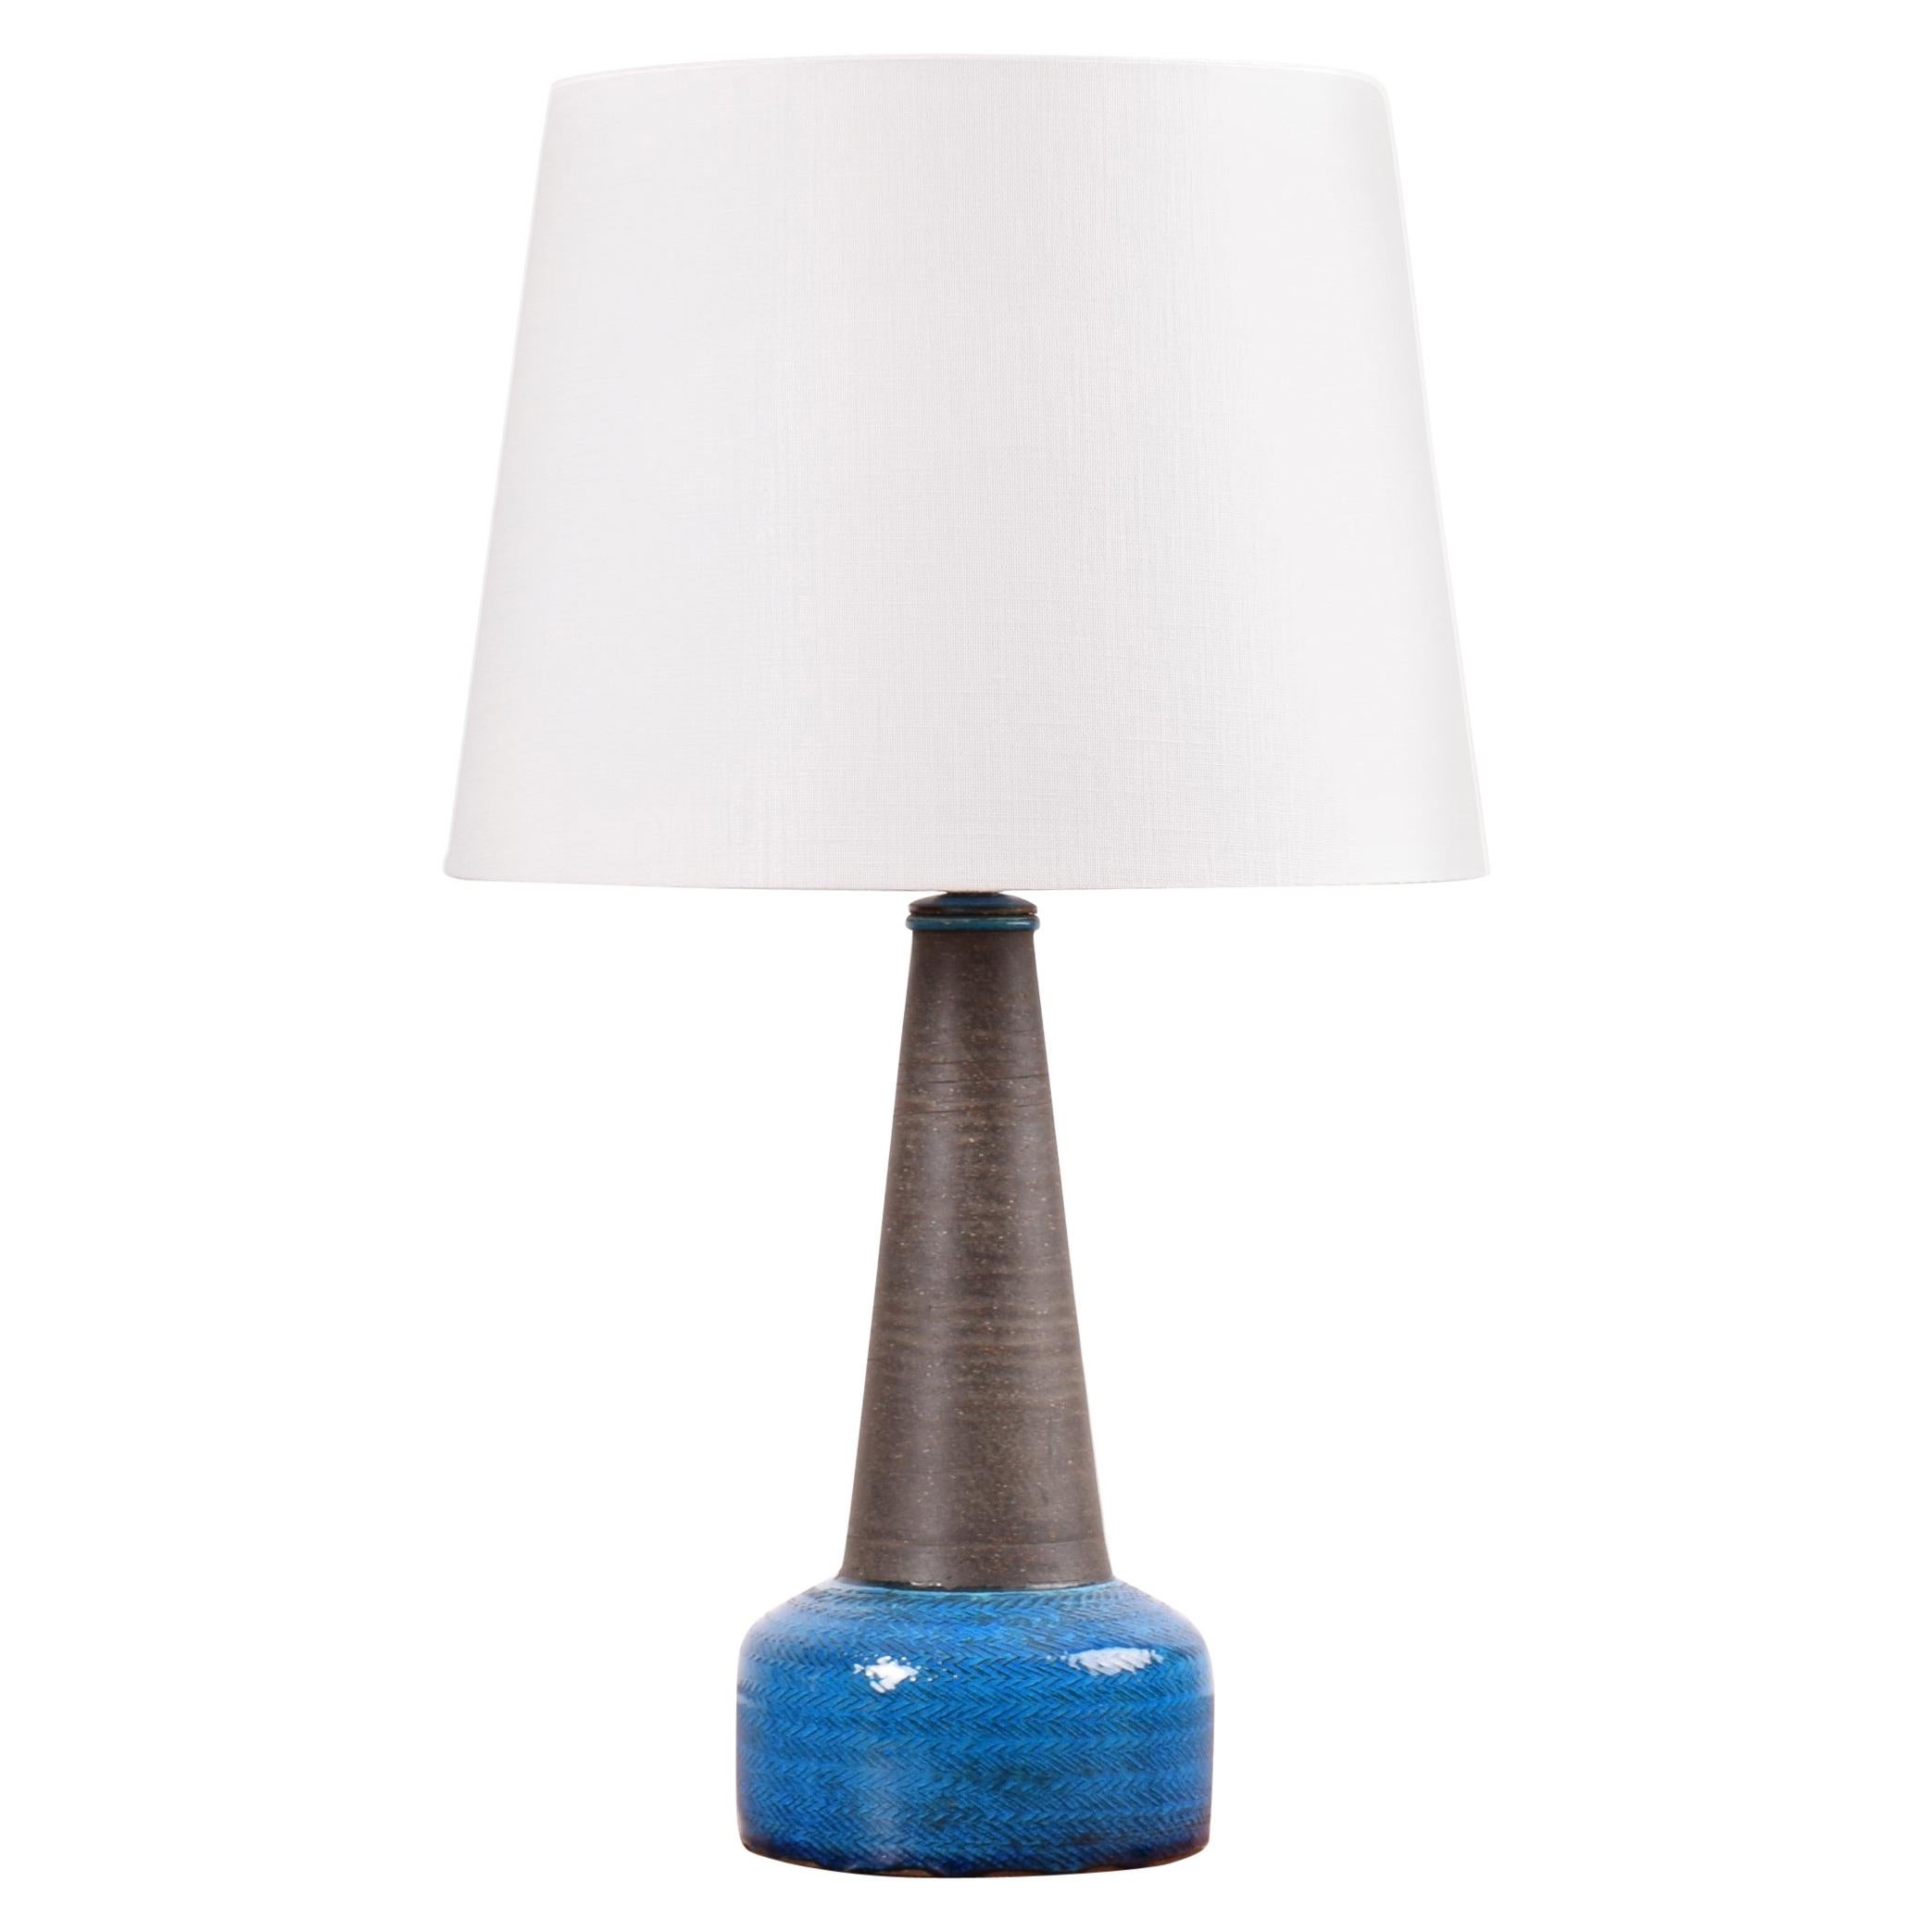 Danish Midcentury Kähler Table Lamp Turquoise Blue and Brown, Denmark, 1960s For Sale